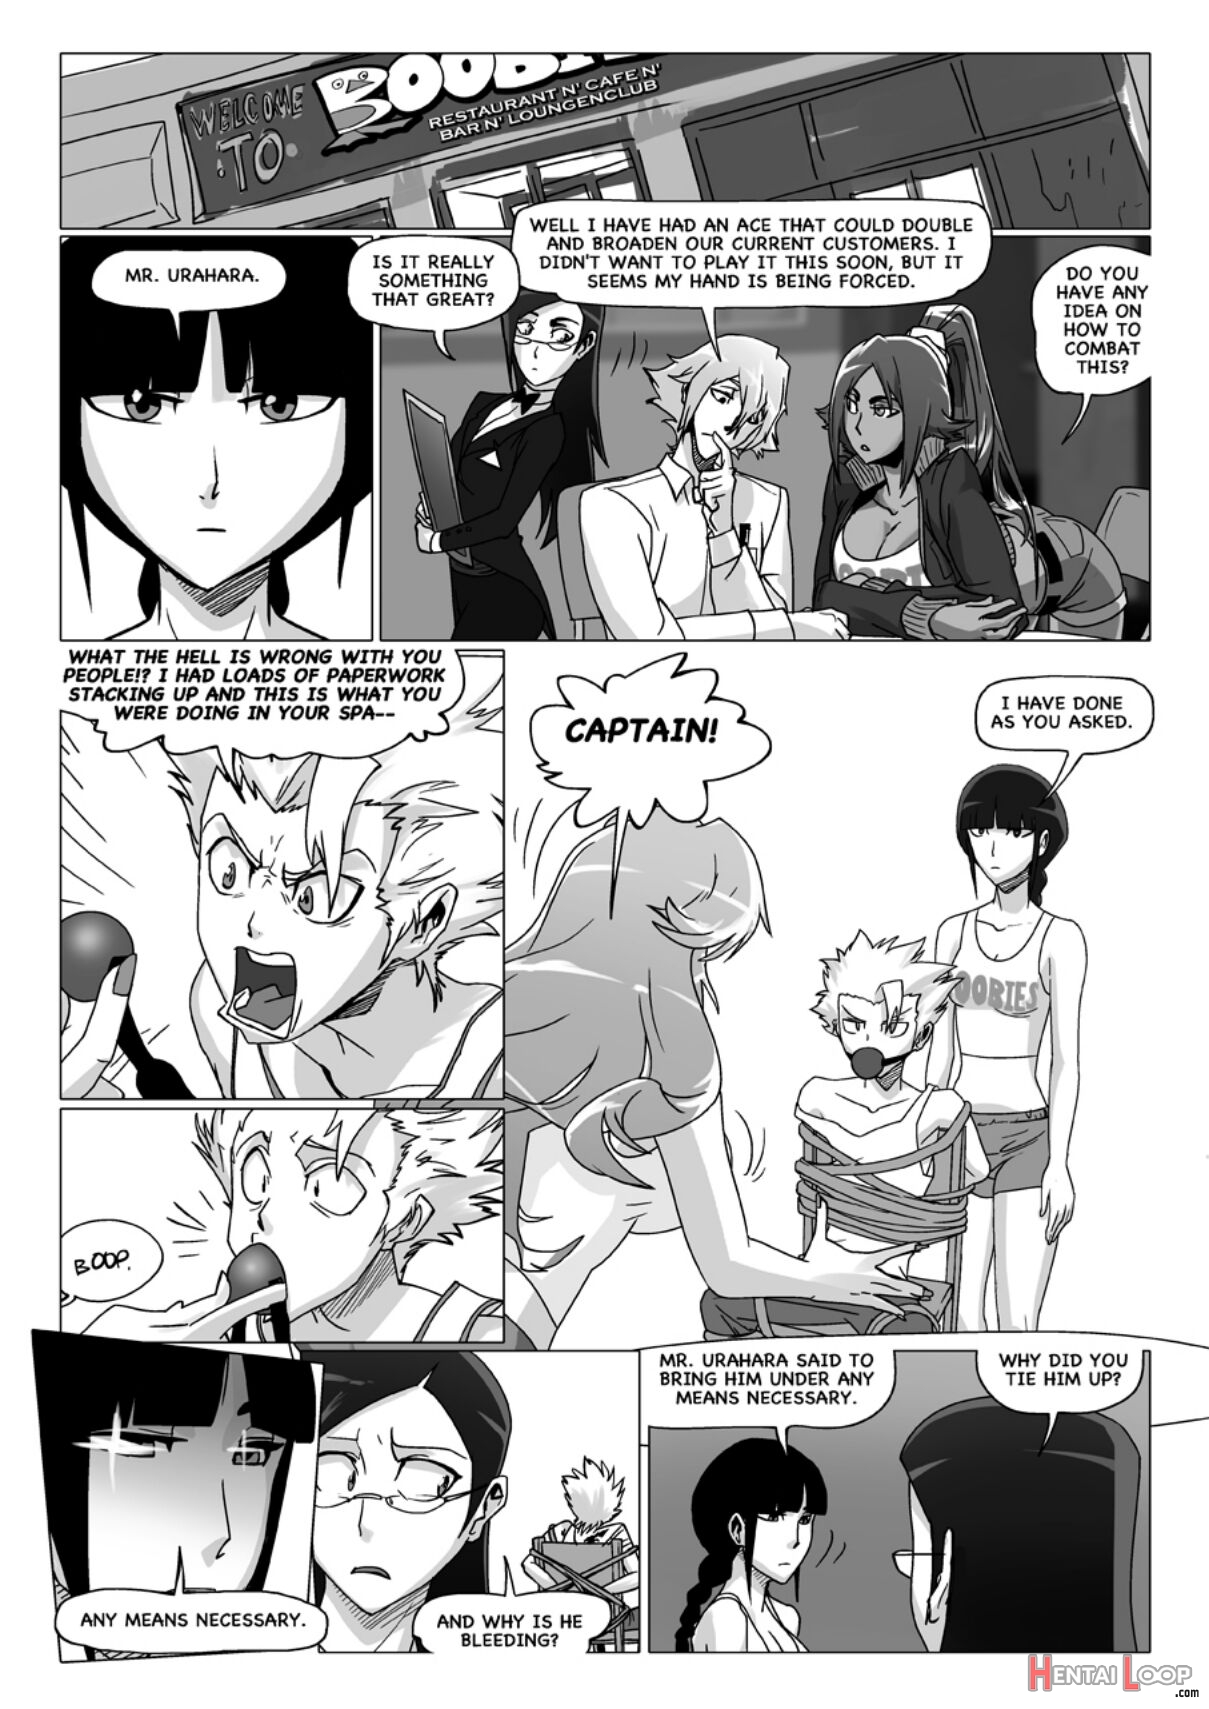 Happy To Serve You - Xxx Version page 114